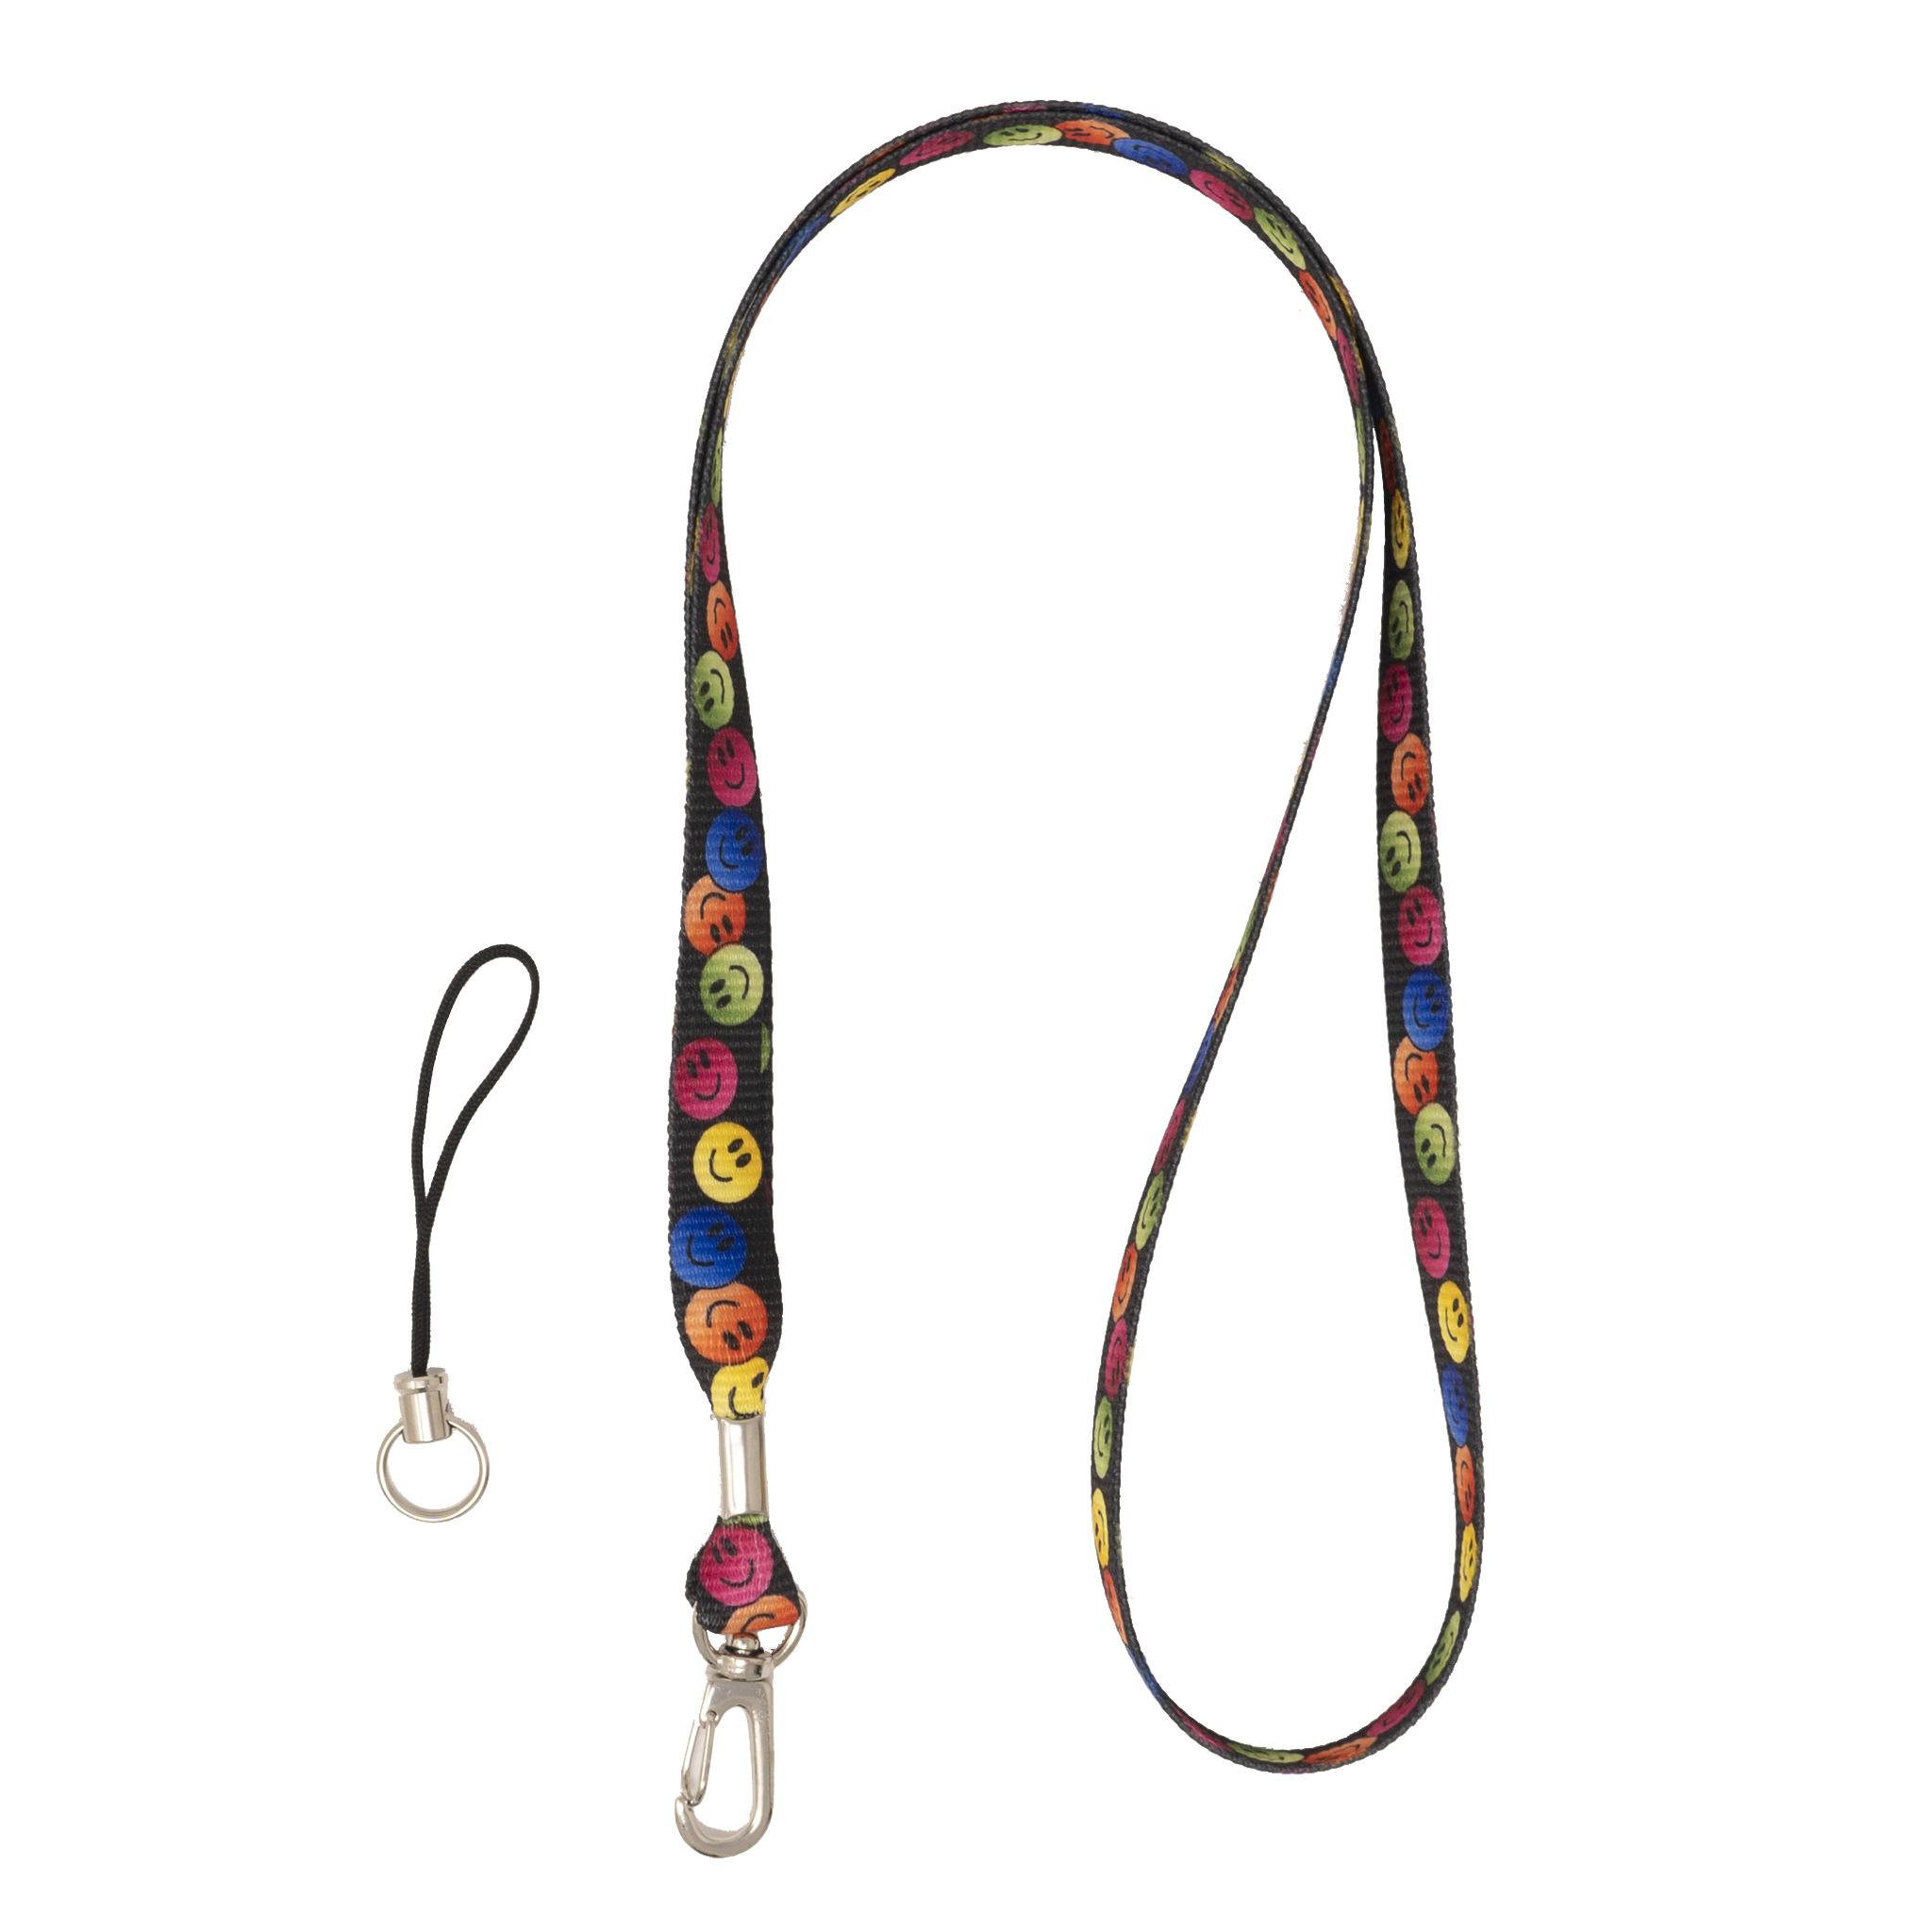 My Fave Camera Lanyard in Happy Faces pattern